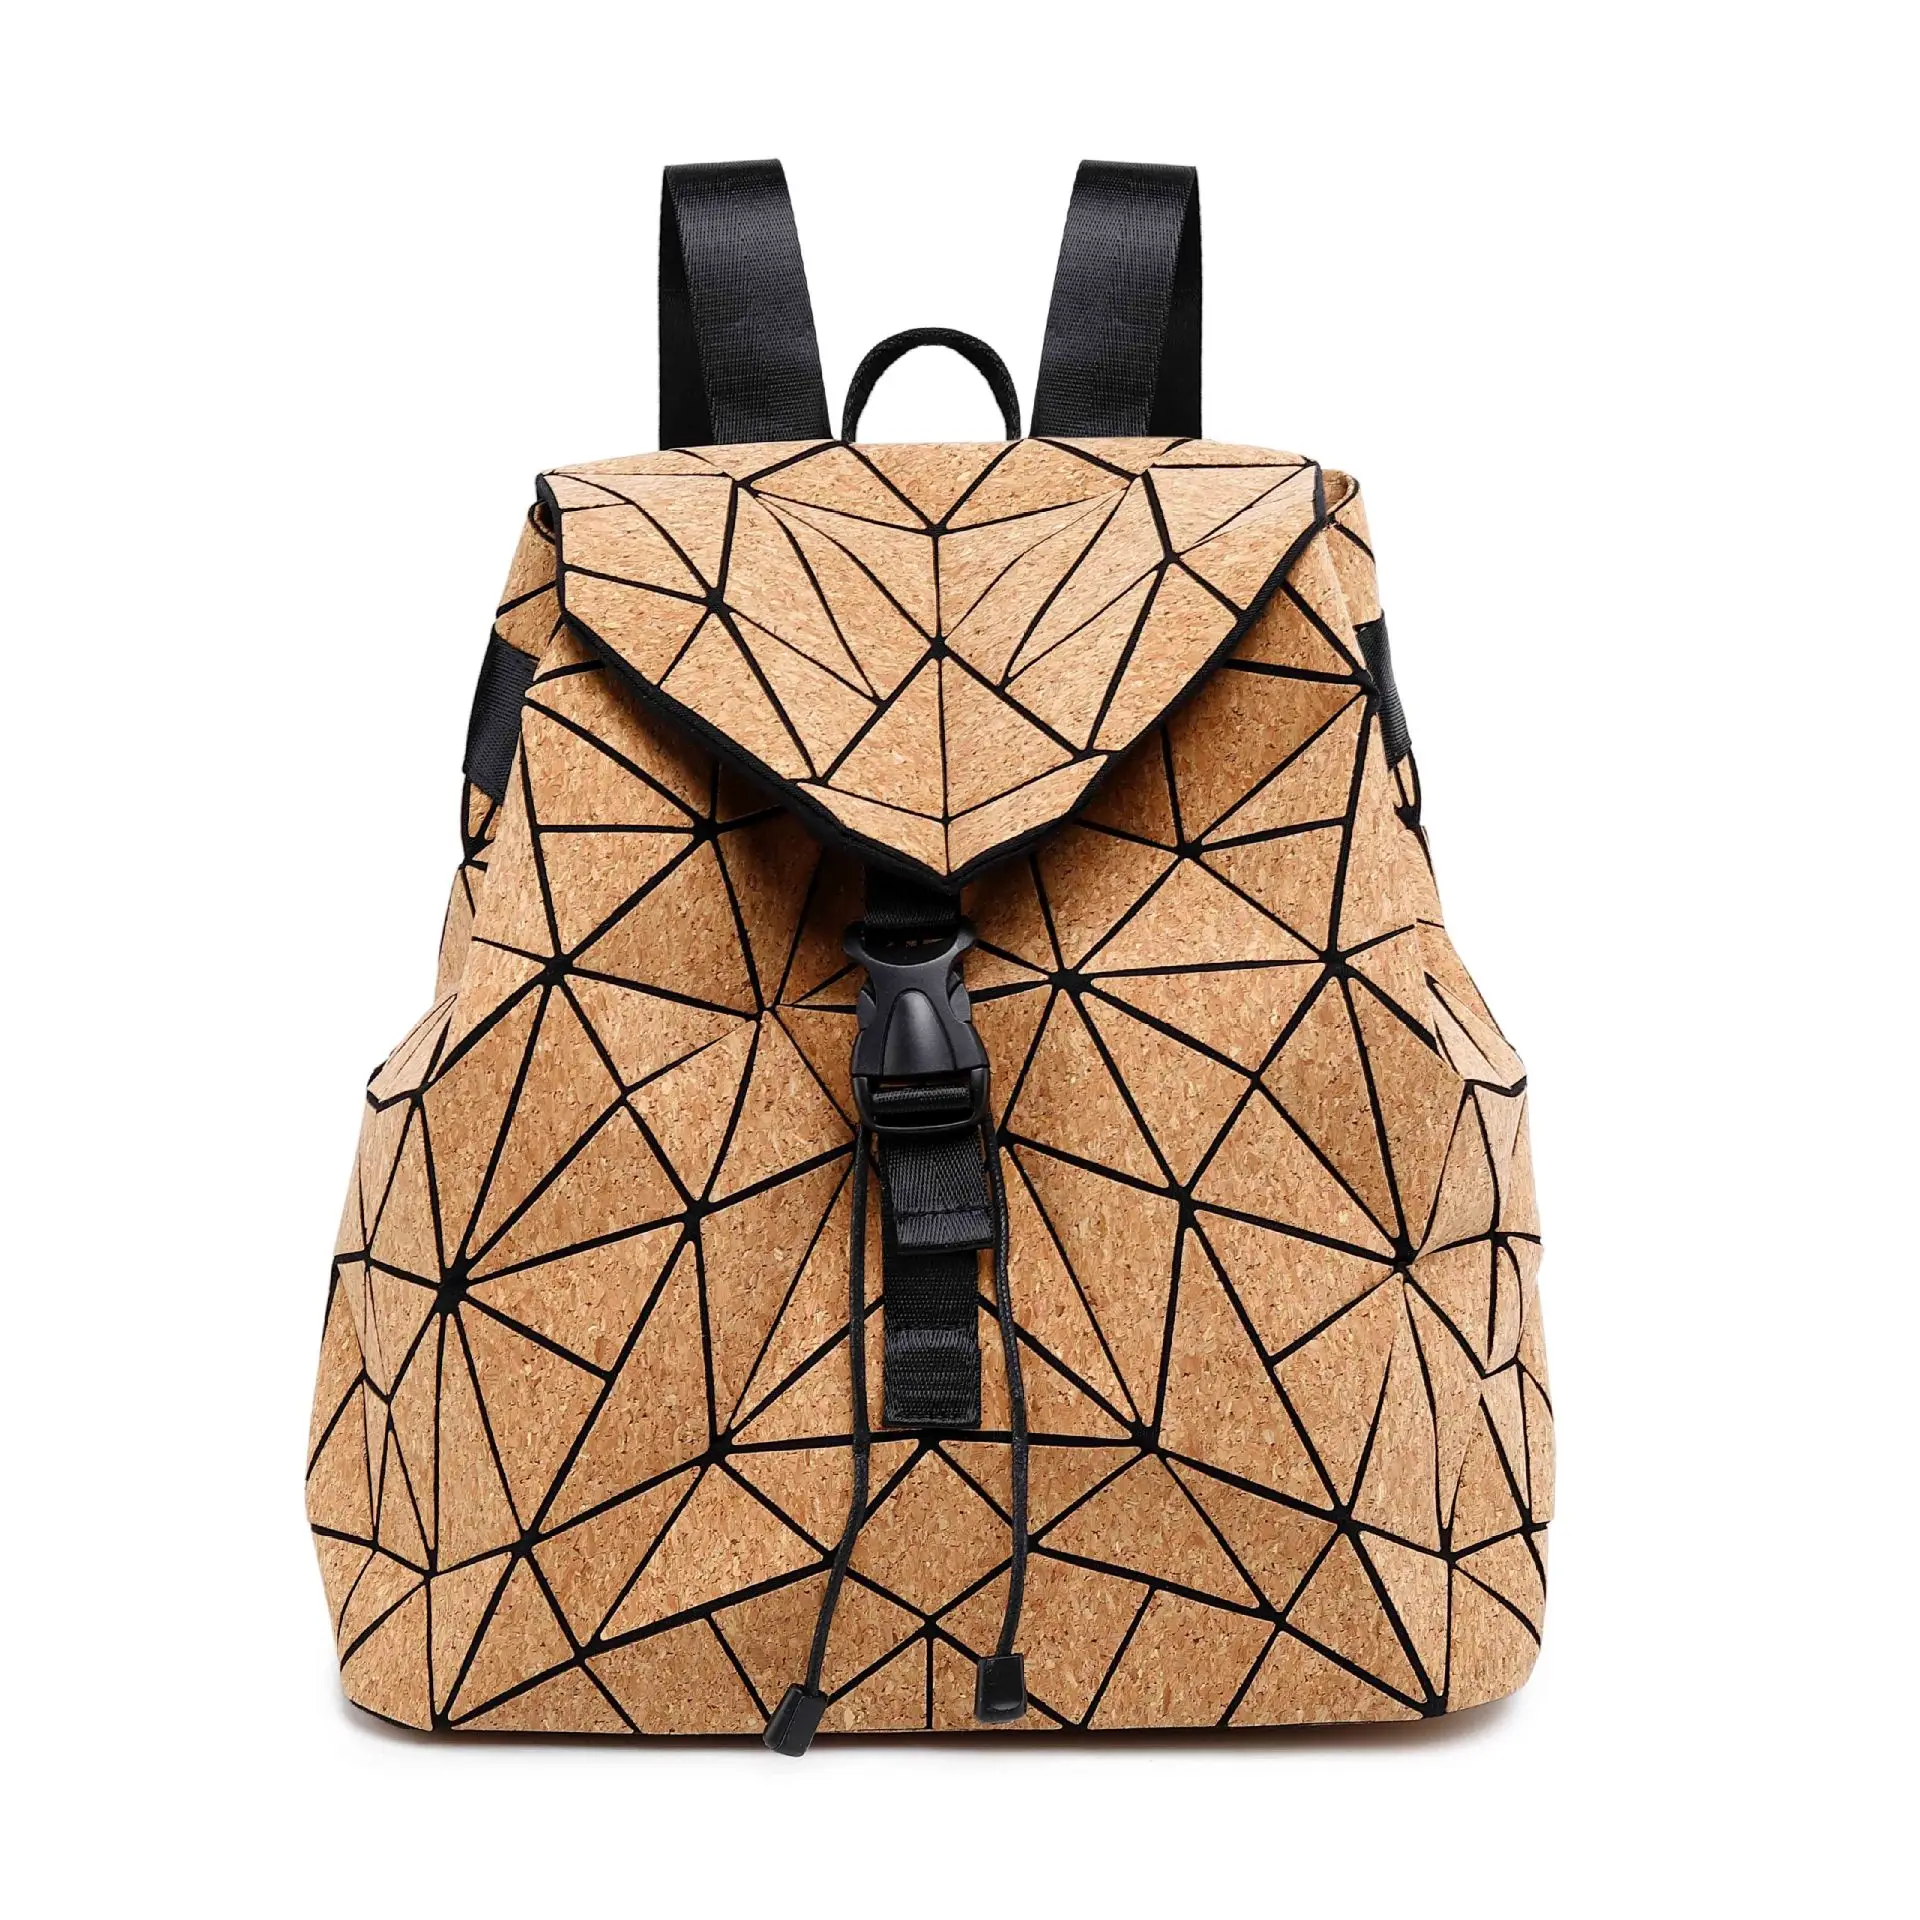 

Leather Rucksack Student Bookbag for Girl Women Fashion Cork Schoolbag Causal Daypack Geometric cork Backpack, As shown in the pictures